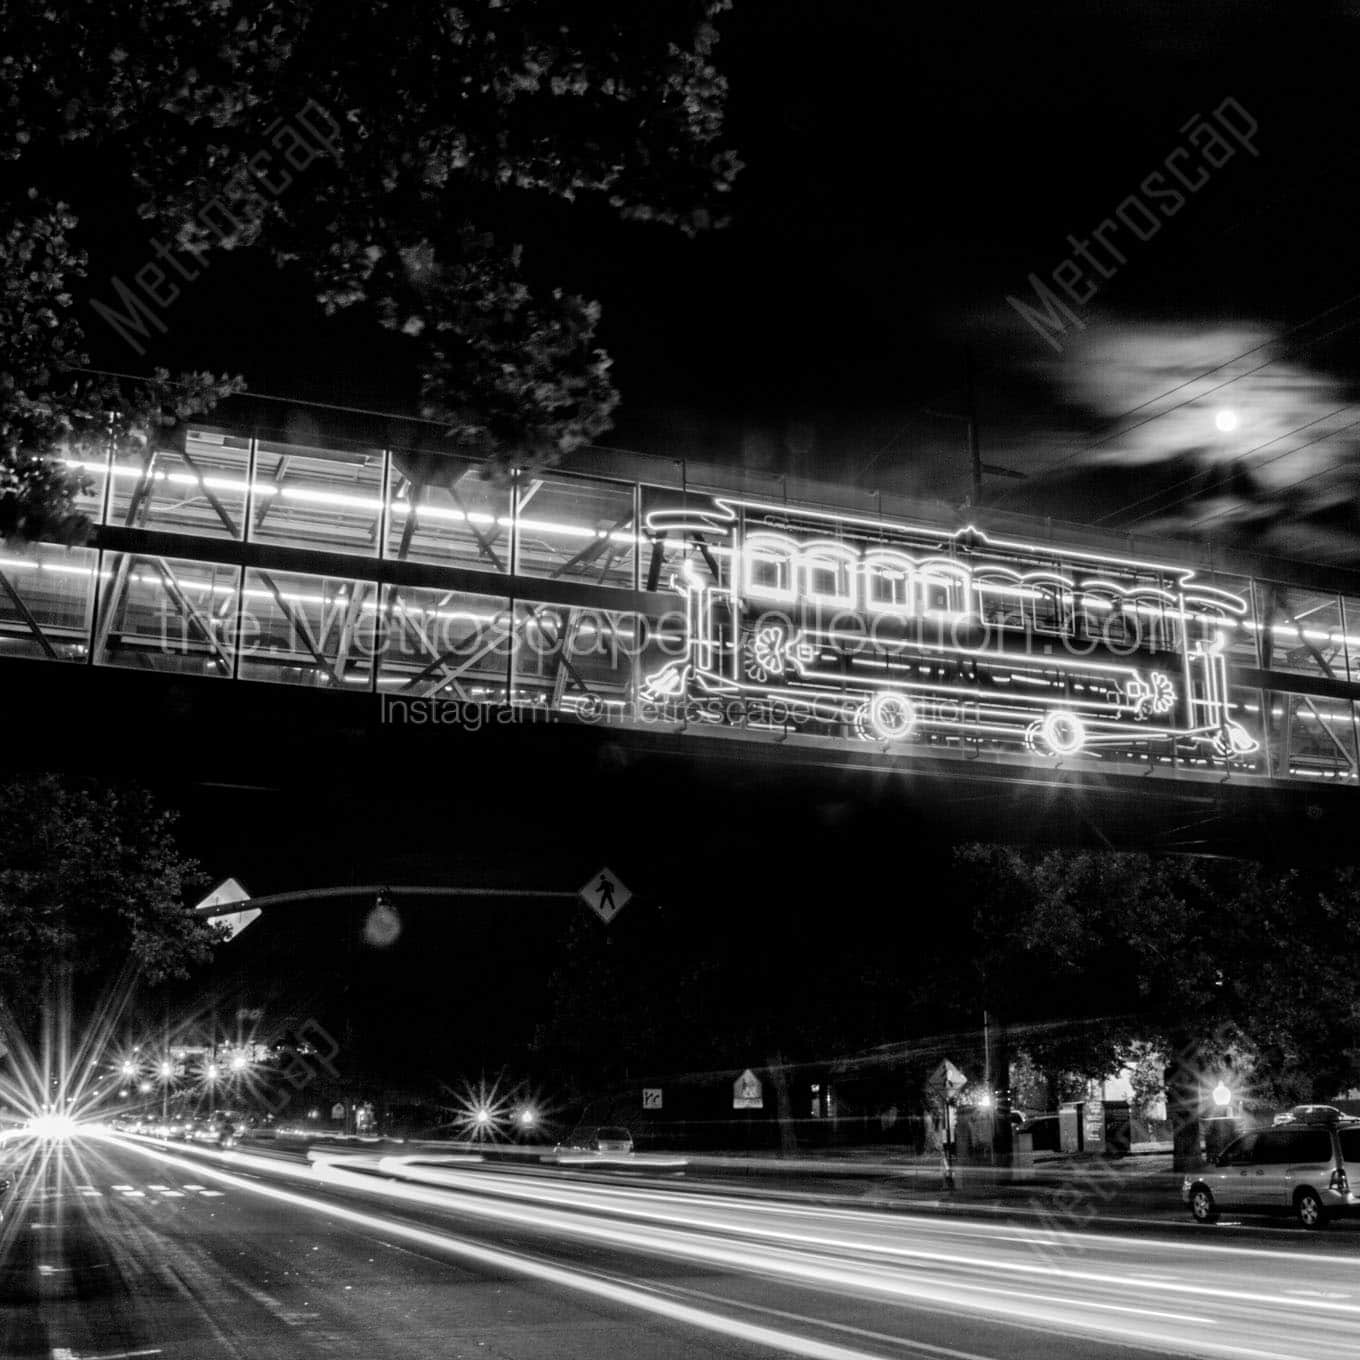 trolly square at night Black & White Office Art